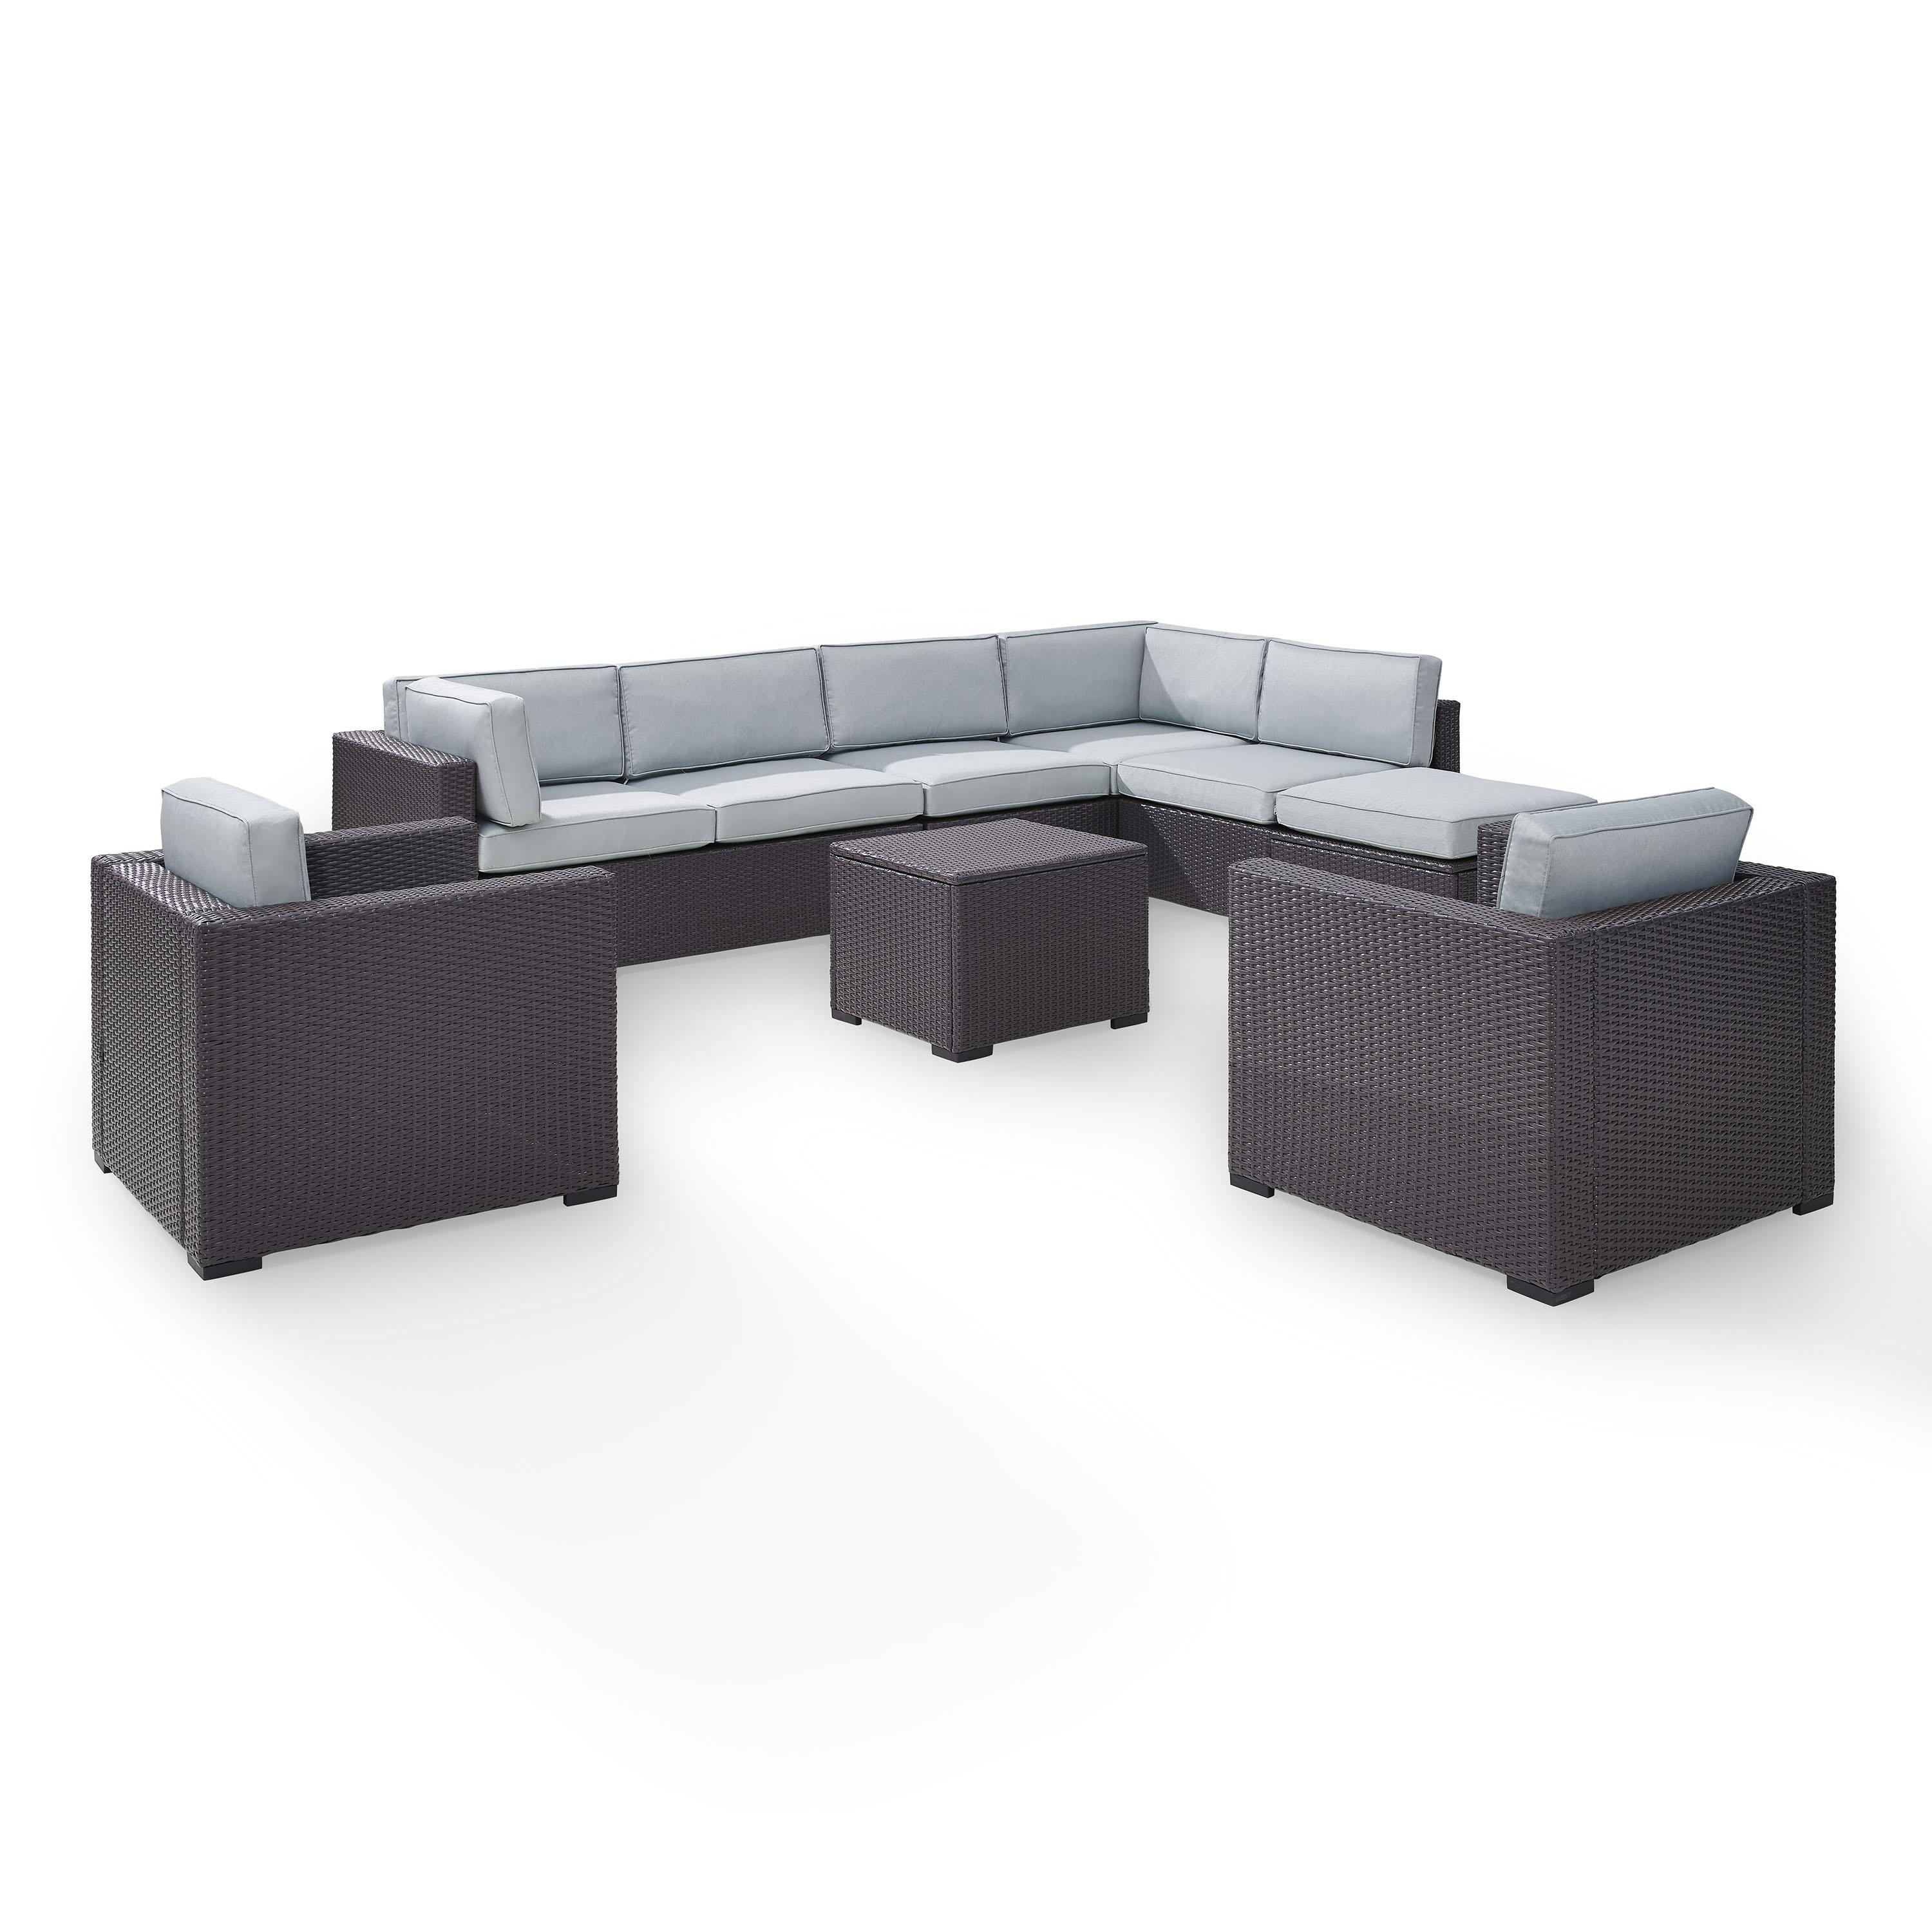 Crosley Furniture Biscayne 7 Piece Metal Patio Sectional Set in Brown/Blue - image 2 of 4